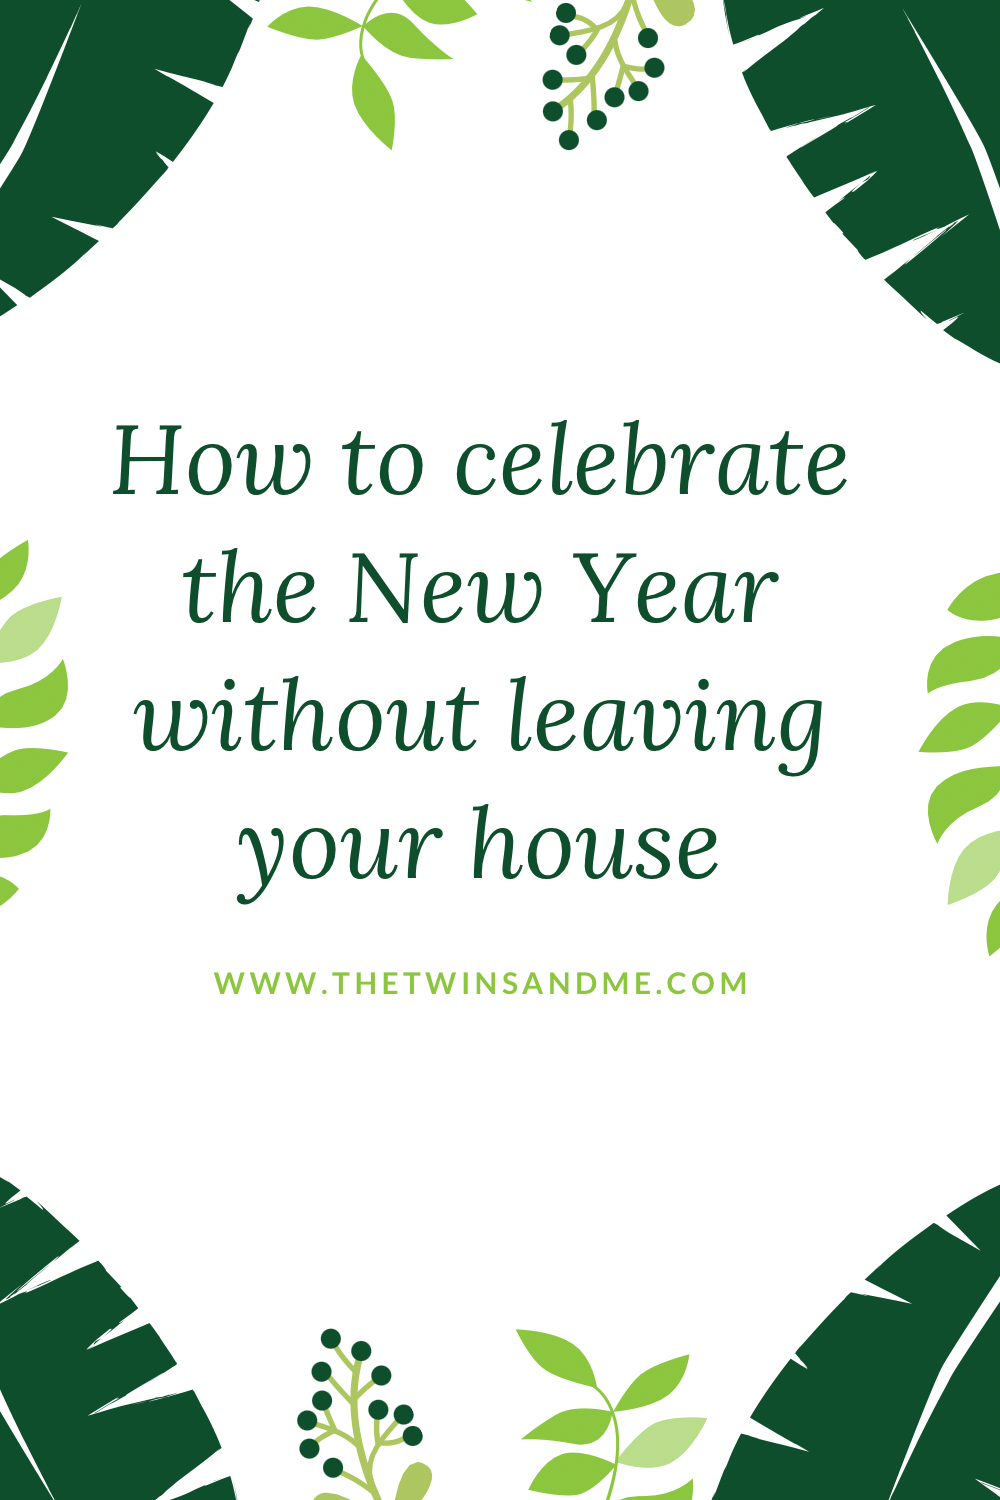 How to celebrate the New Year without leaving your house!